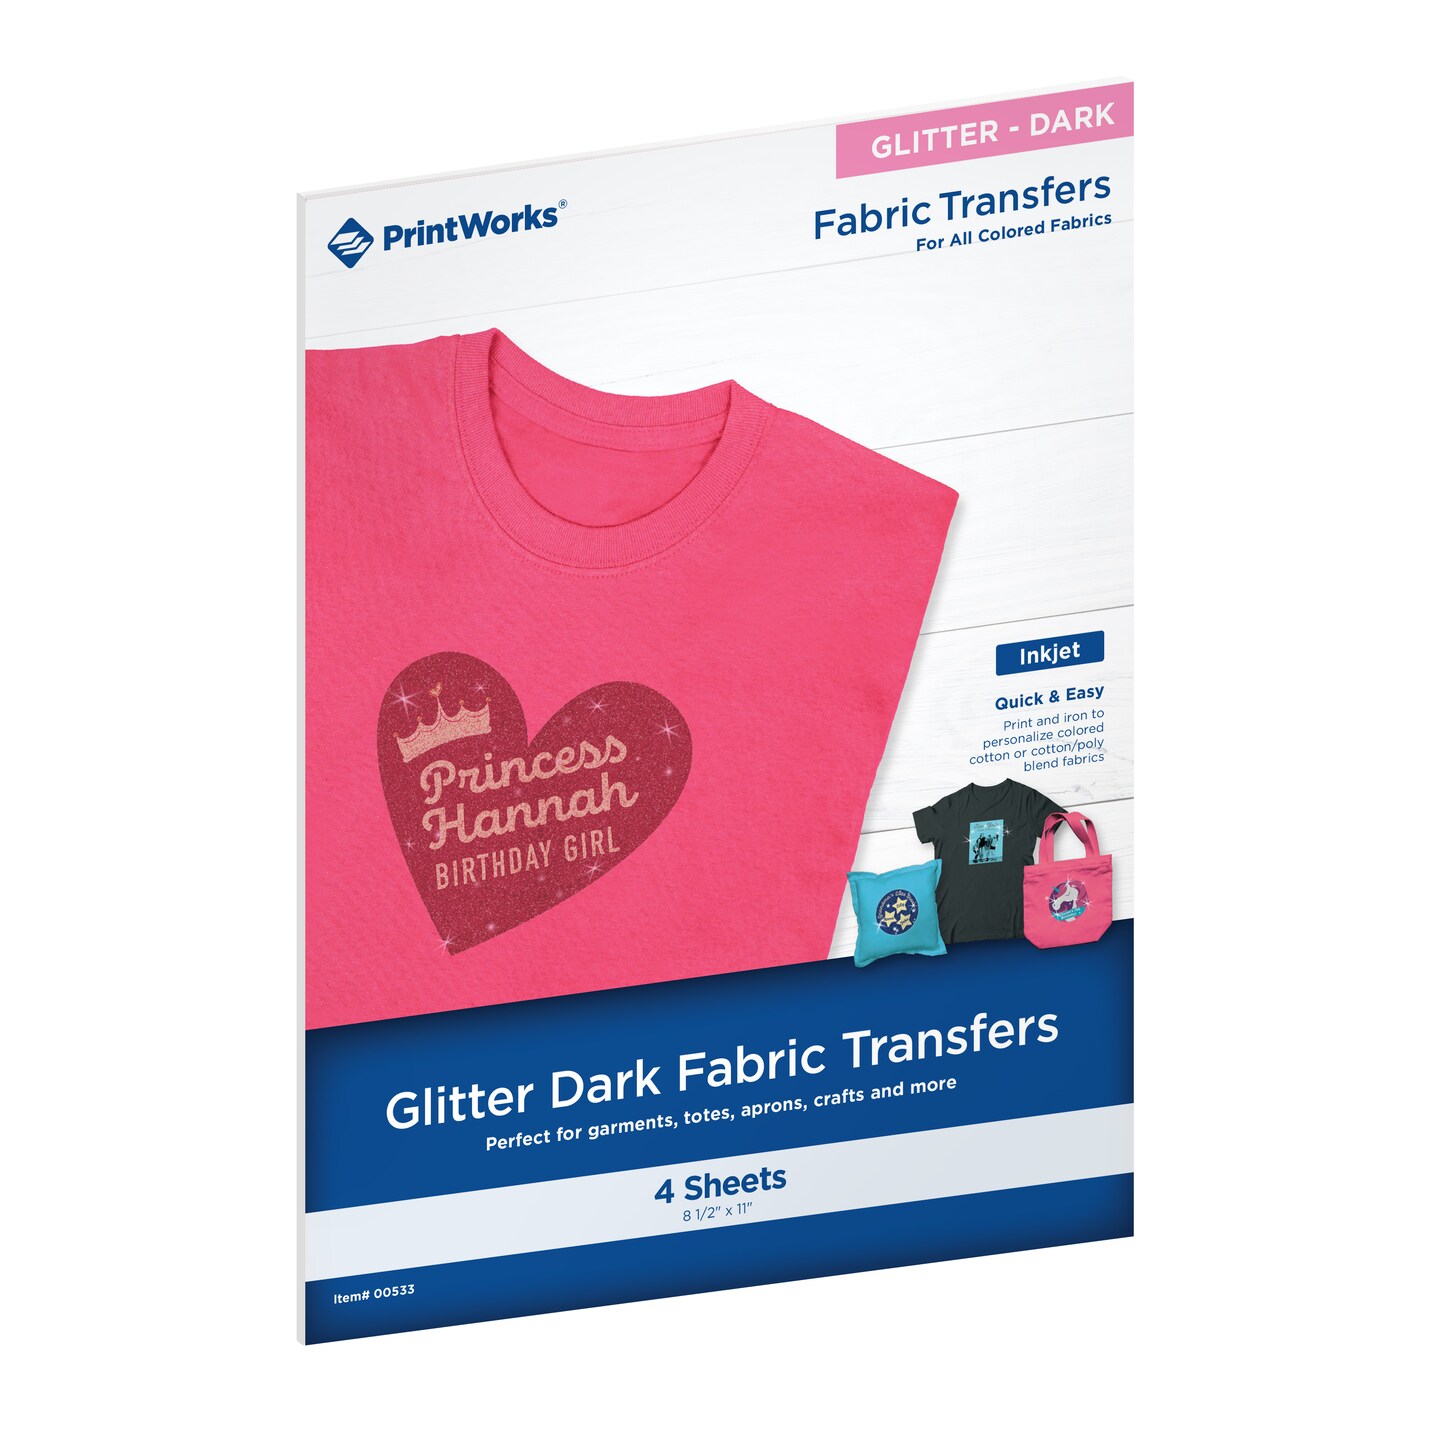 Printworks Glitter Dark Fabric Transfers, for All Colored Fabrics, 4 Sheets, Inkjet, 8.5 x 11, (00533)